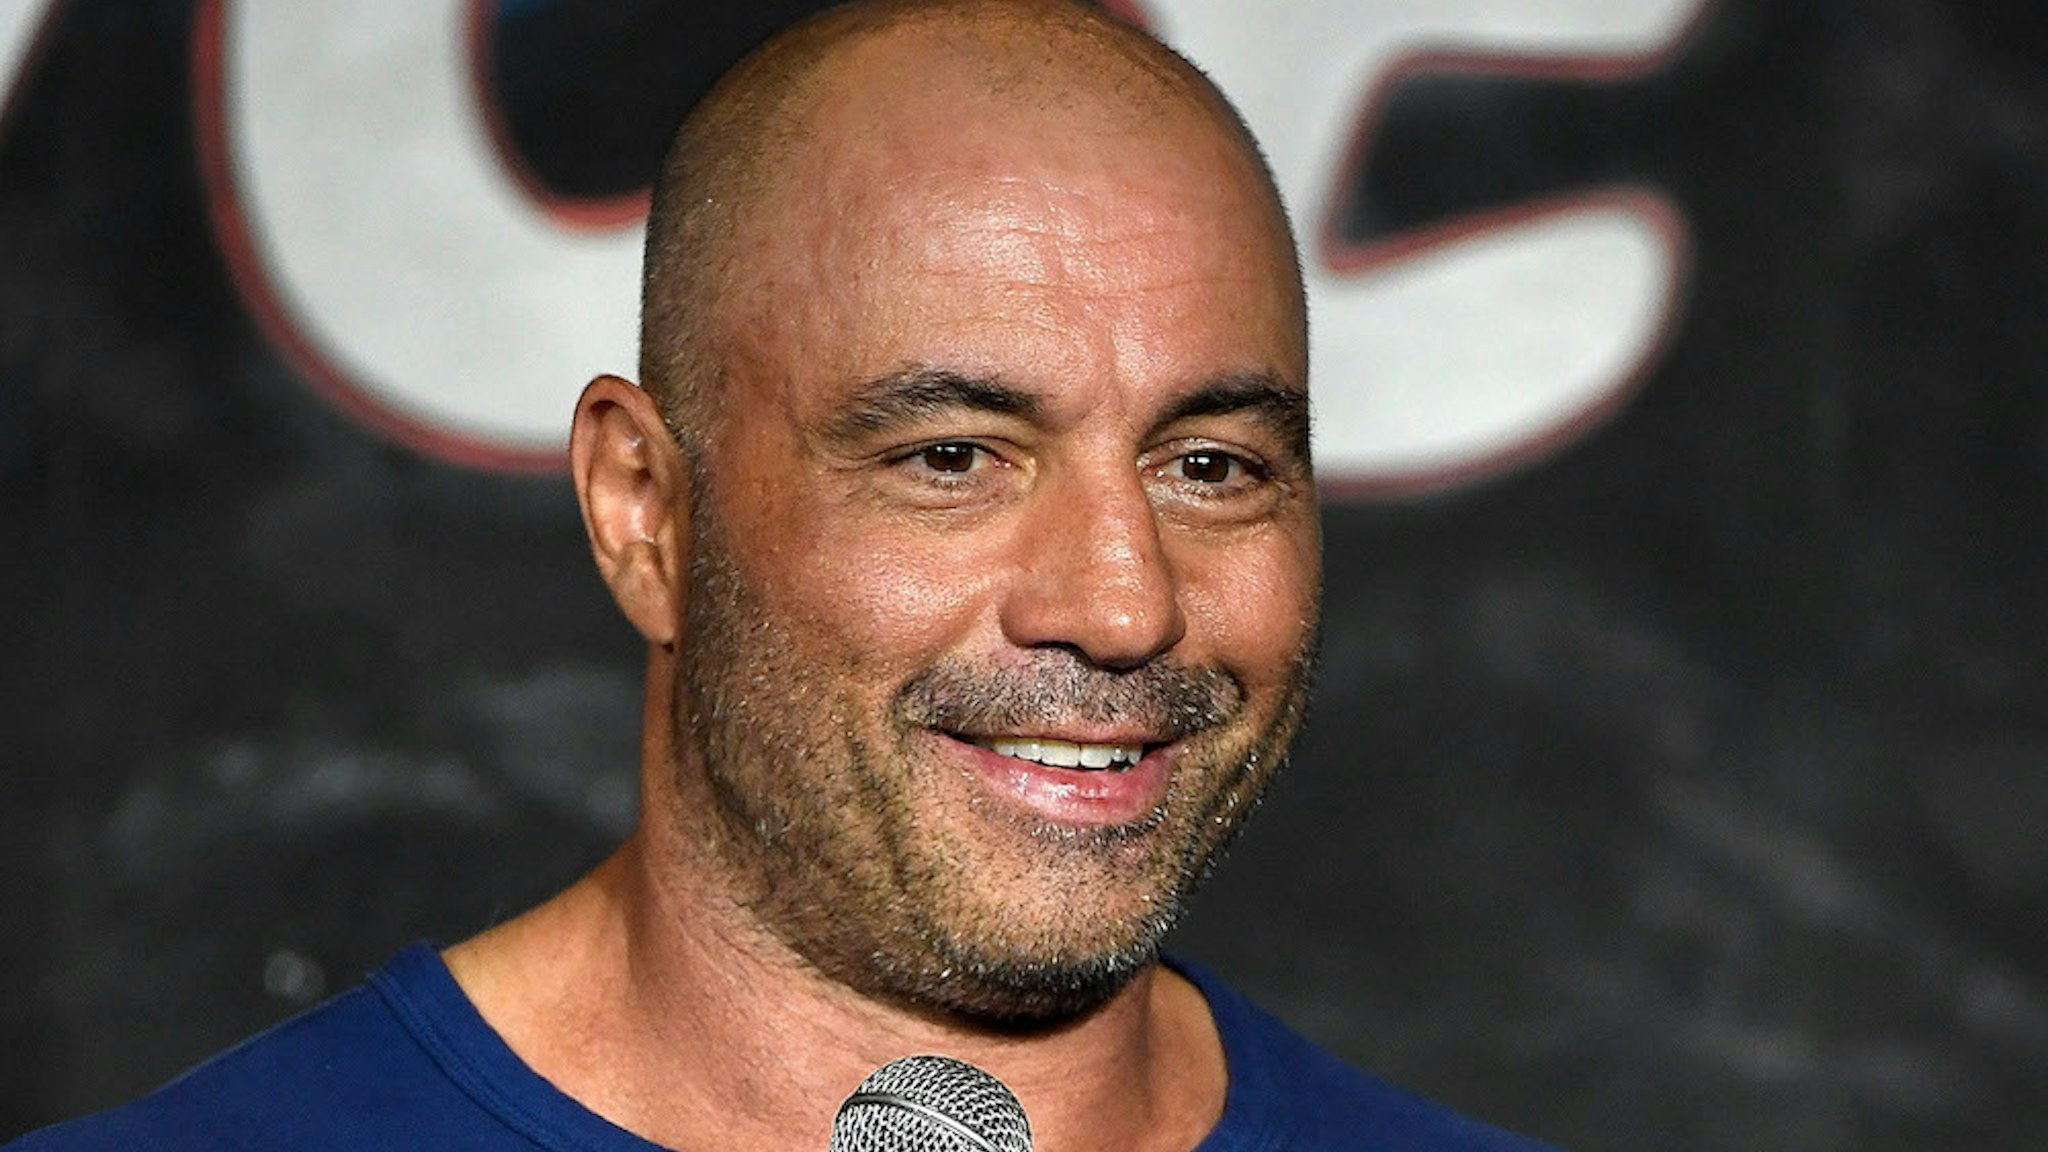 PASADENA, CA - SEPTEMBER 27: Comedian Joe Rogan performs during his appearance at The Ice House Comedy Club on September 27, 2017 in Pasadena, California. (Photo by Michael Schwartz/WireImage)